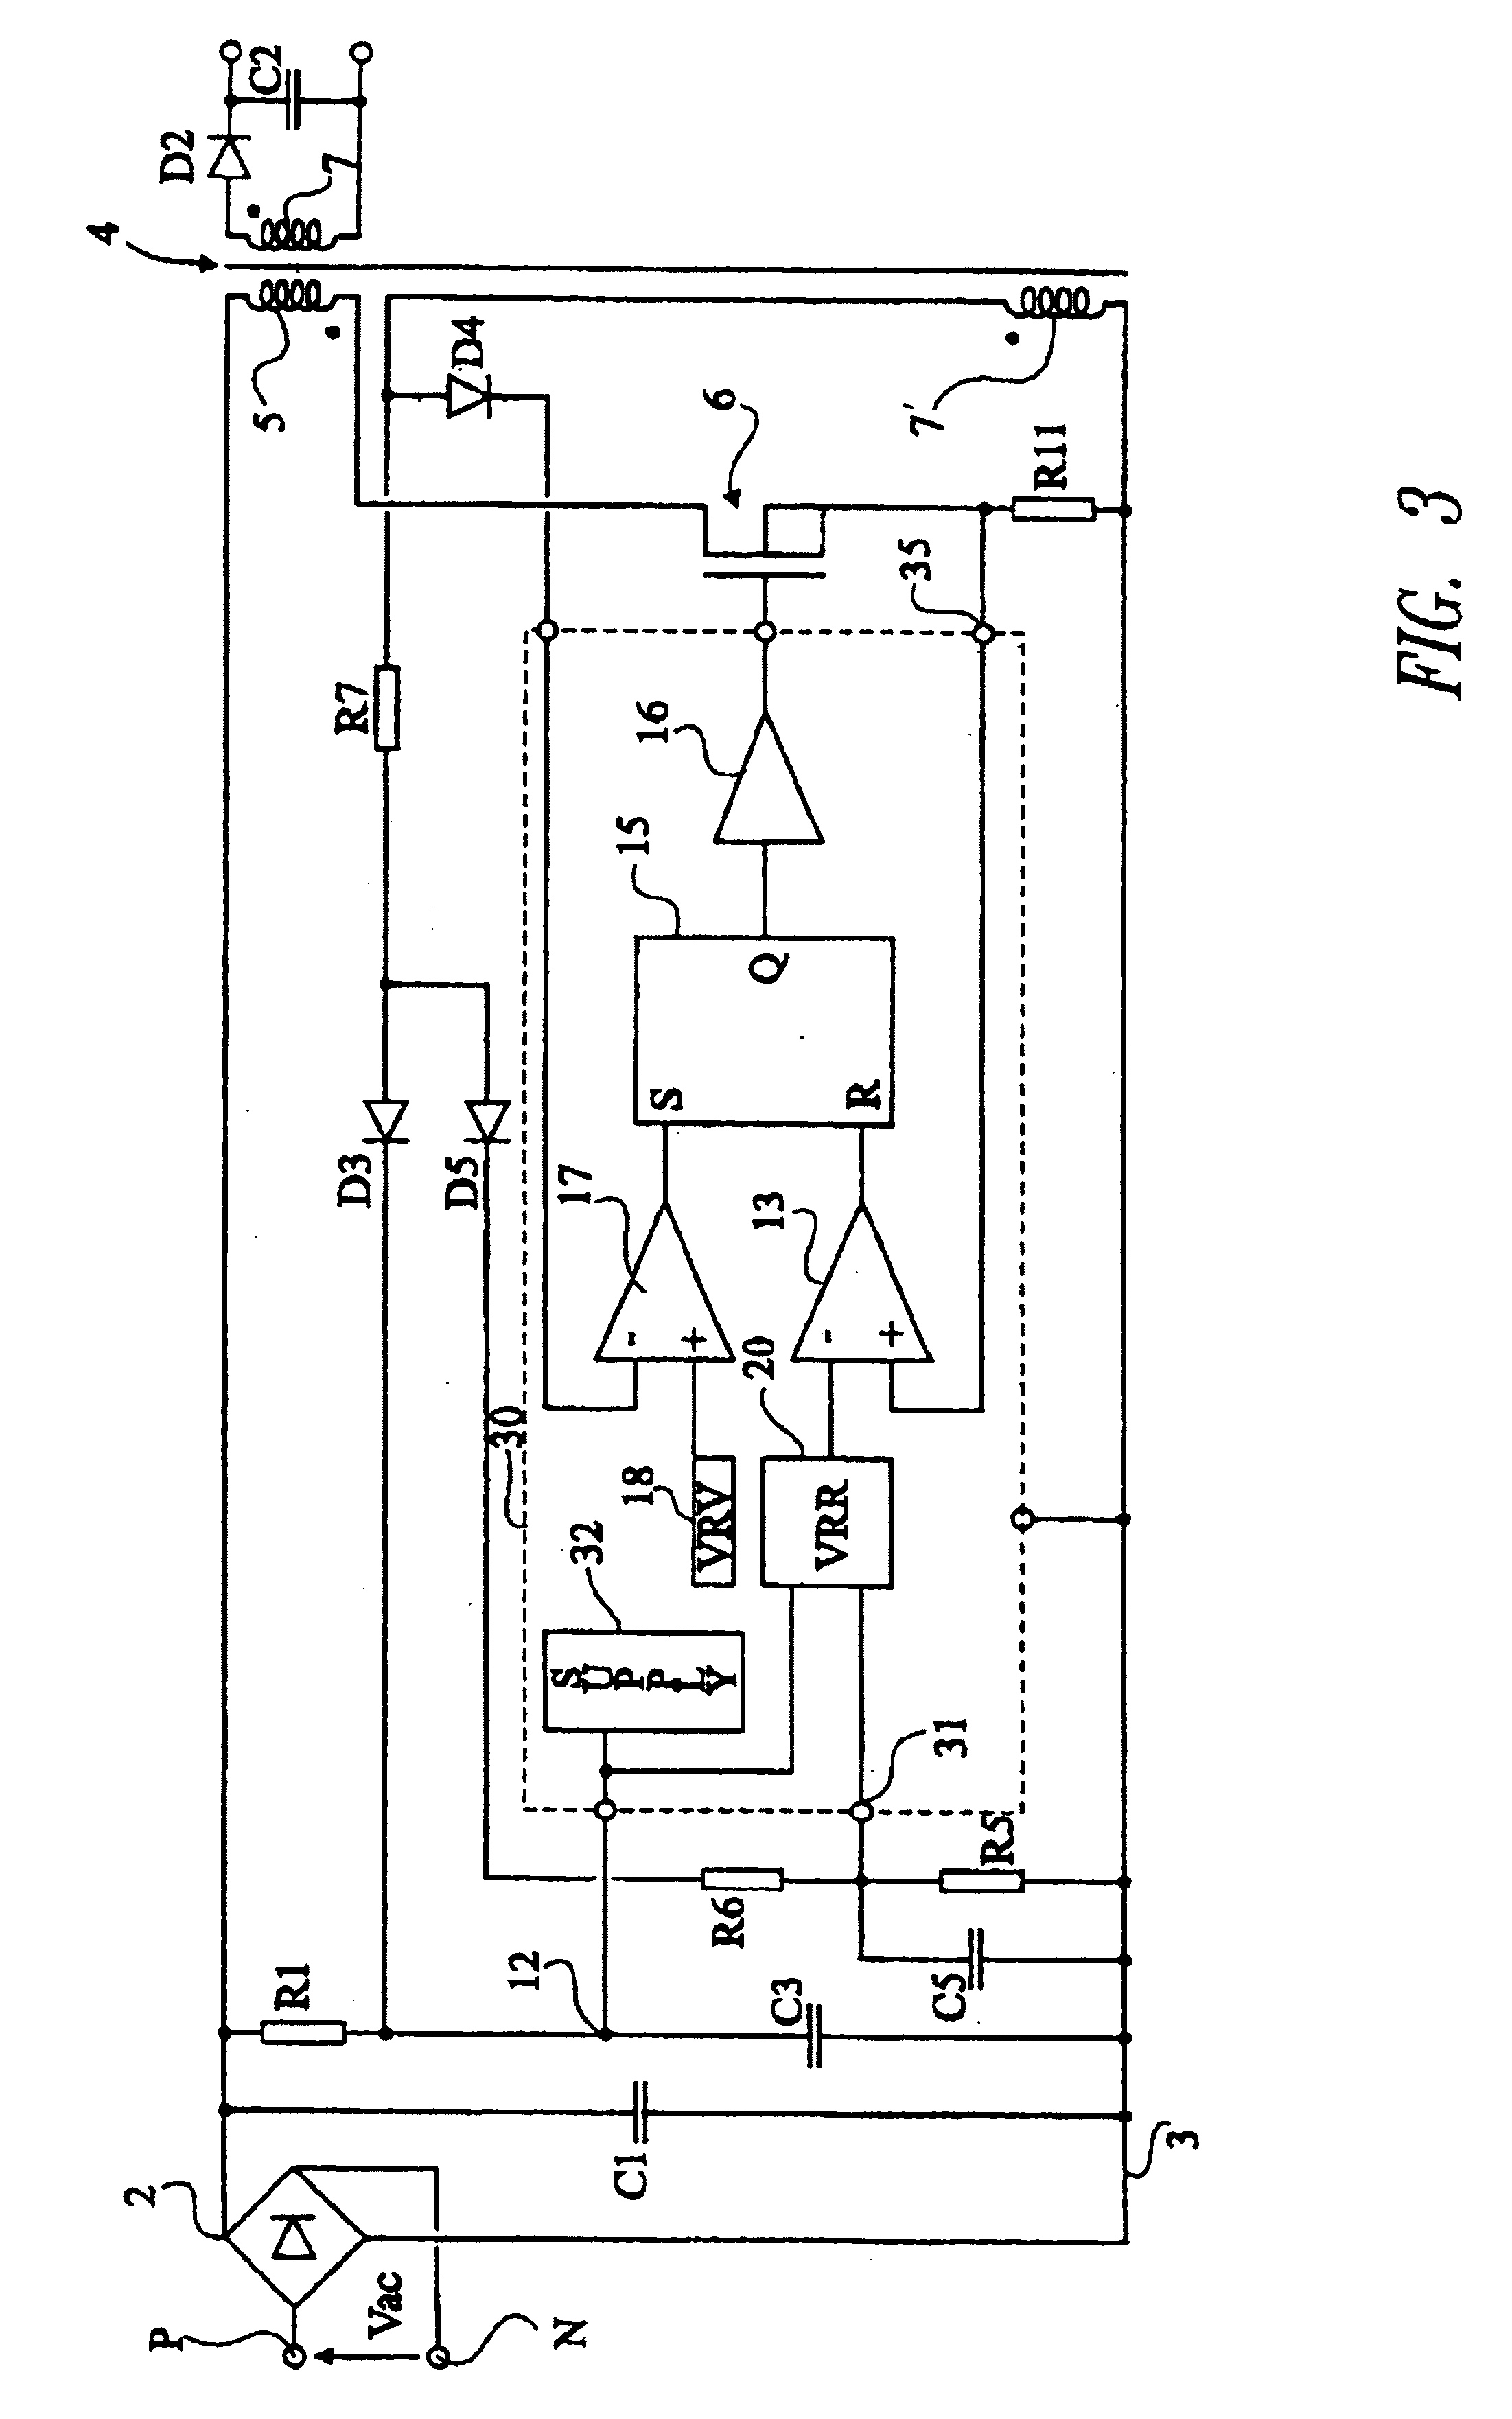 Voltage converter with a self-oscillating control circuit